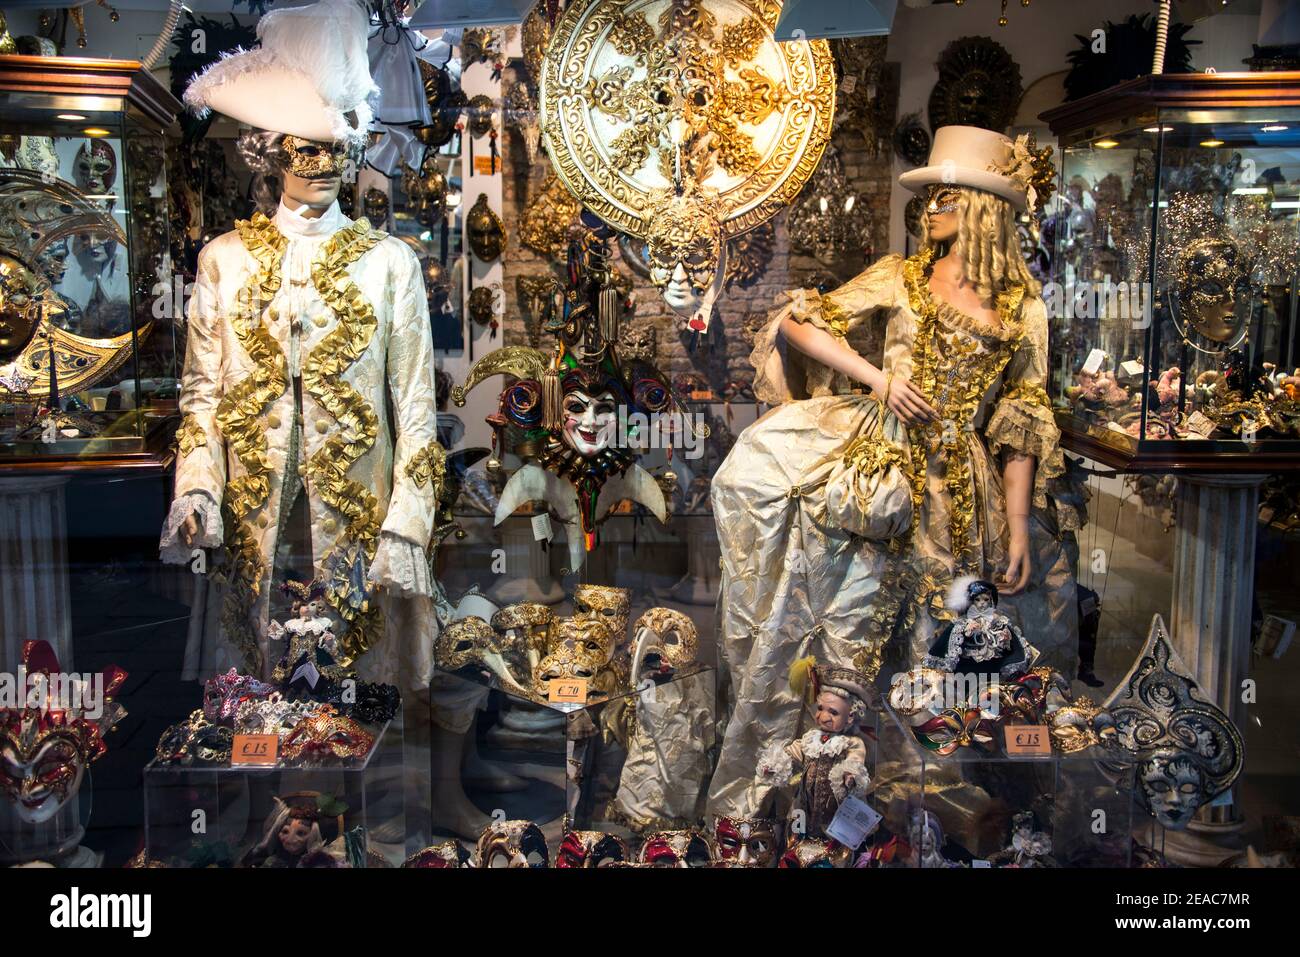 Masks and costumes, Venice Stock Photo